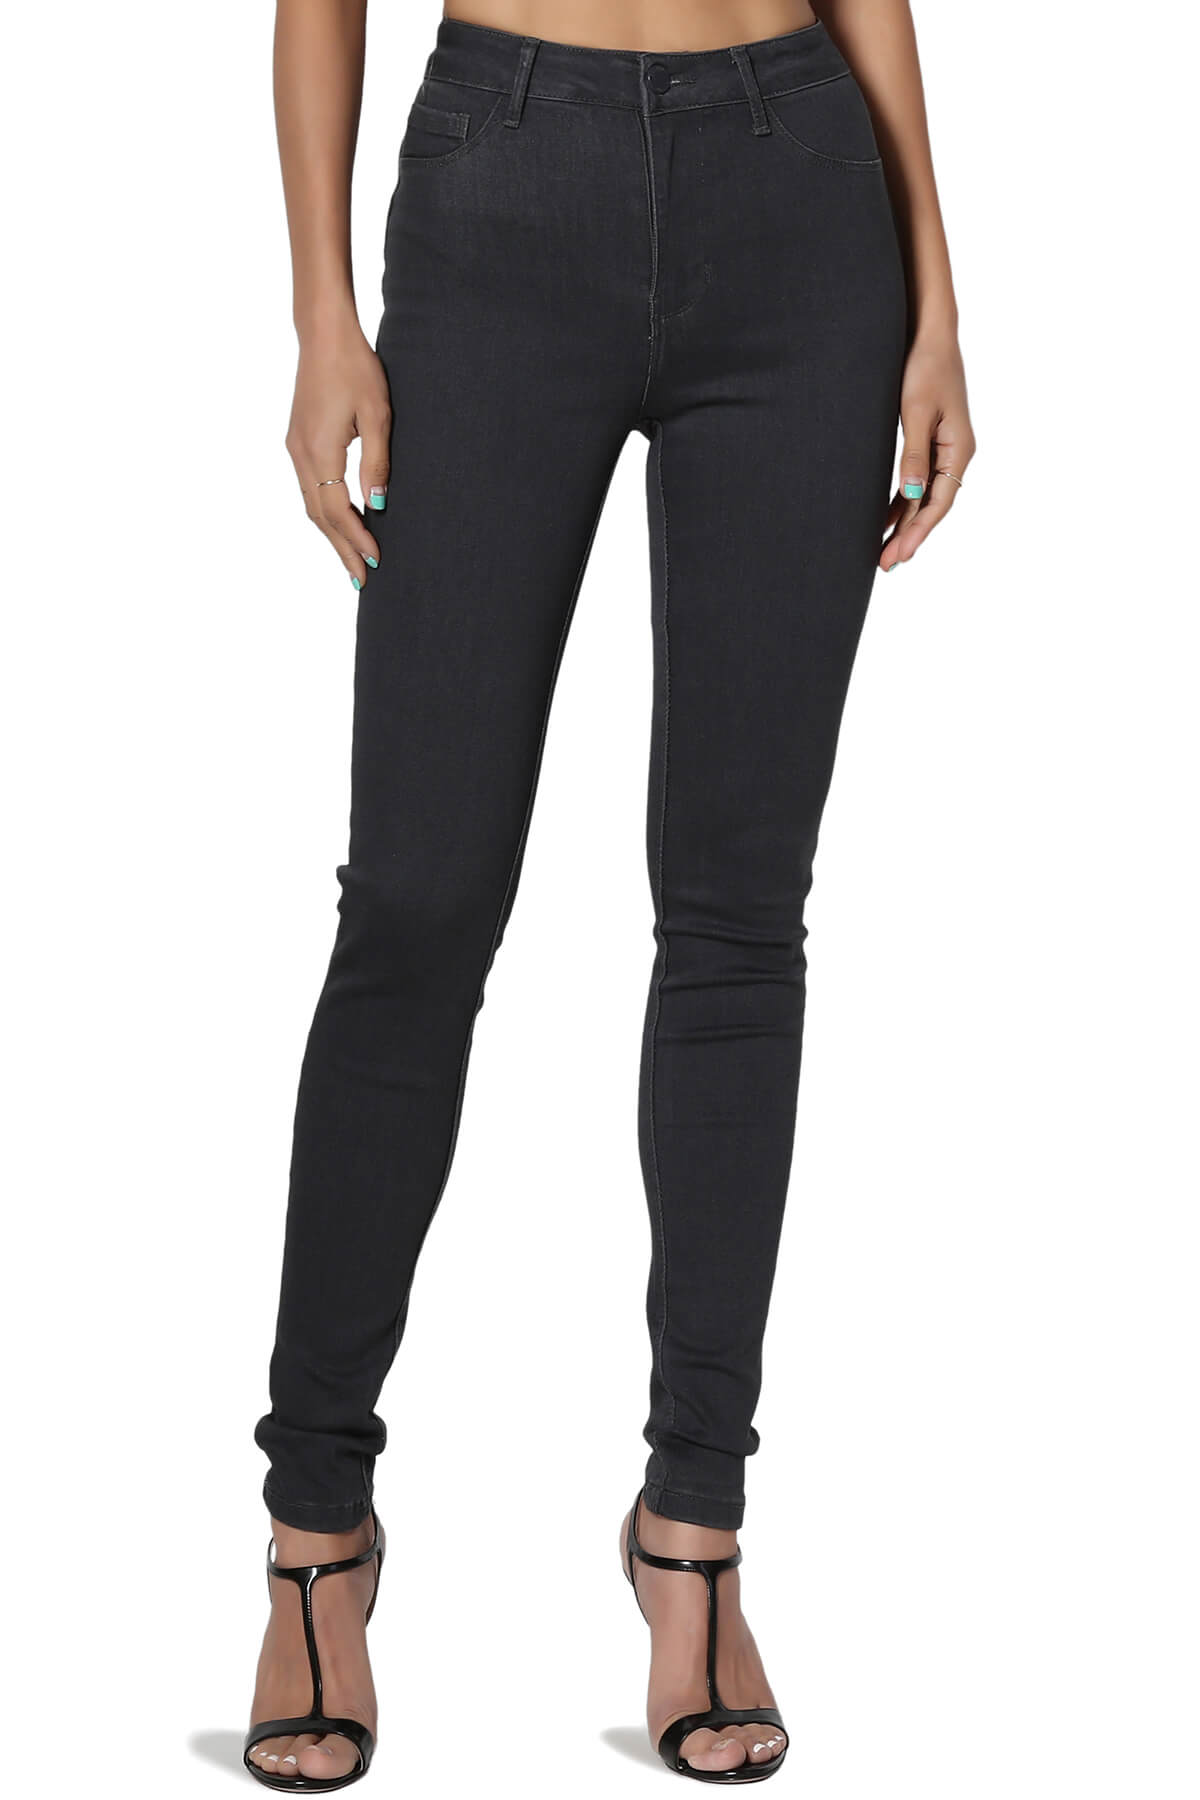 Women's Must-Have Colored High Rise Ankle Skinny Jeans Stretch Denim Jeggings - image 1 of 7